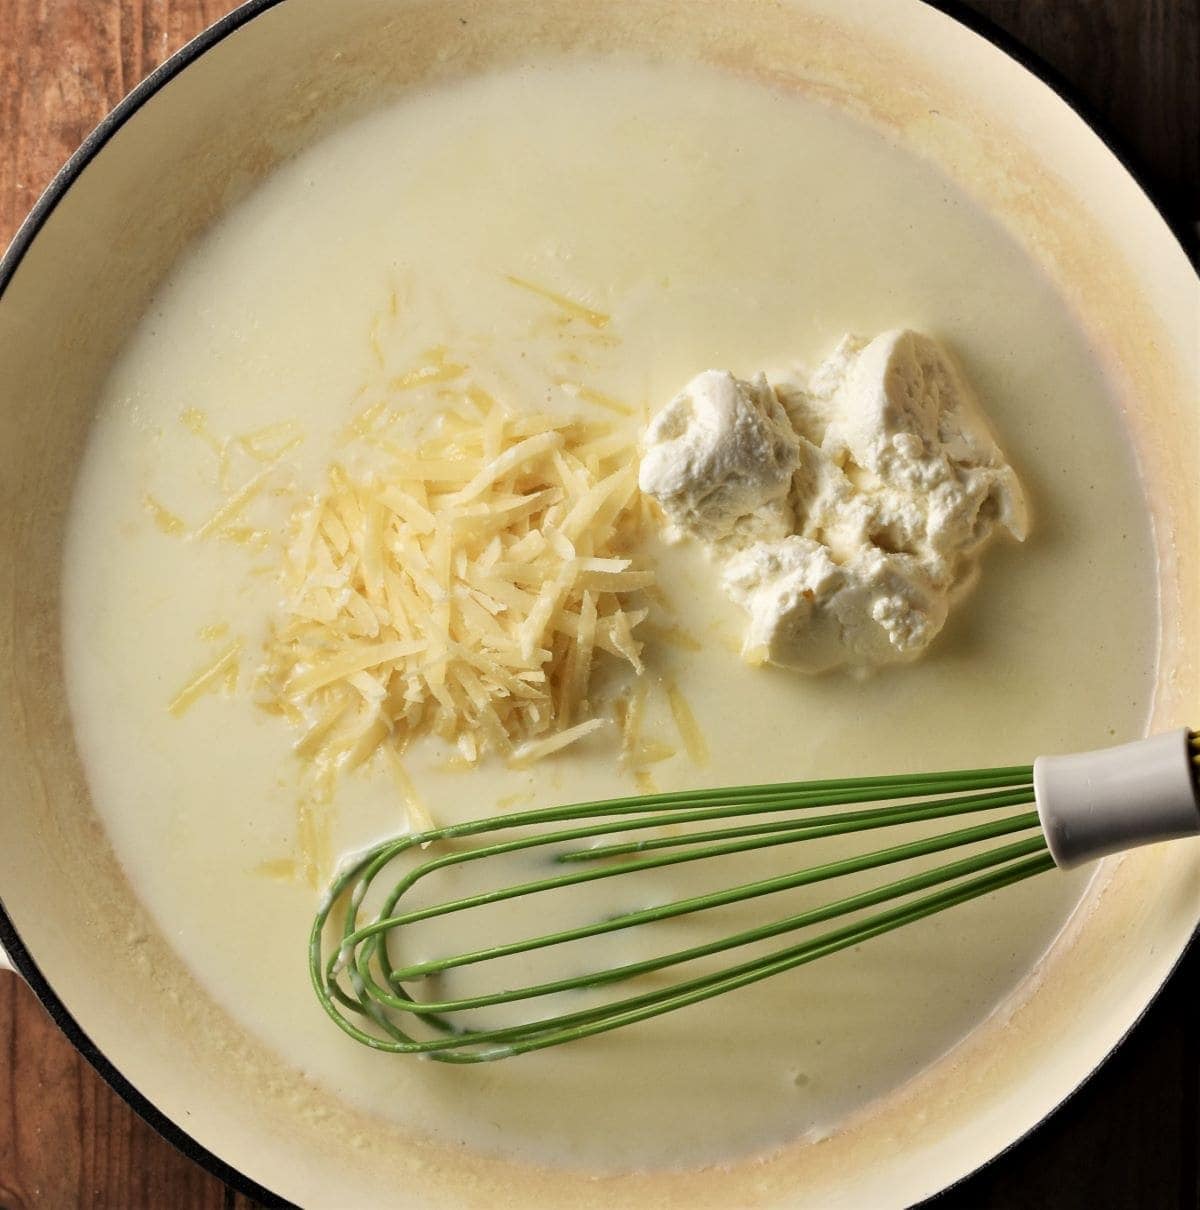 Creamy sauce with cheese in large white dish with green whisk.